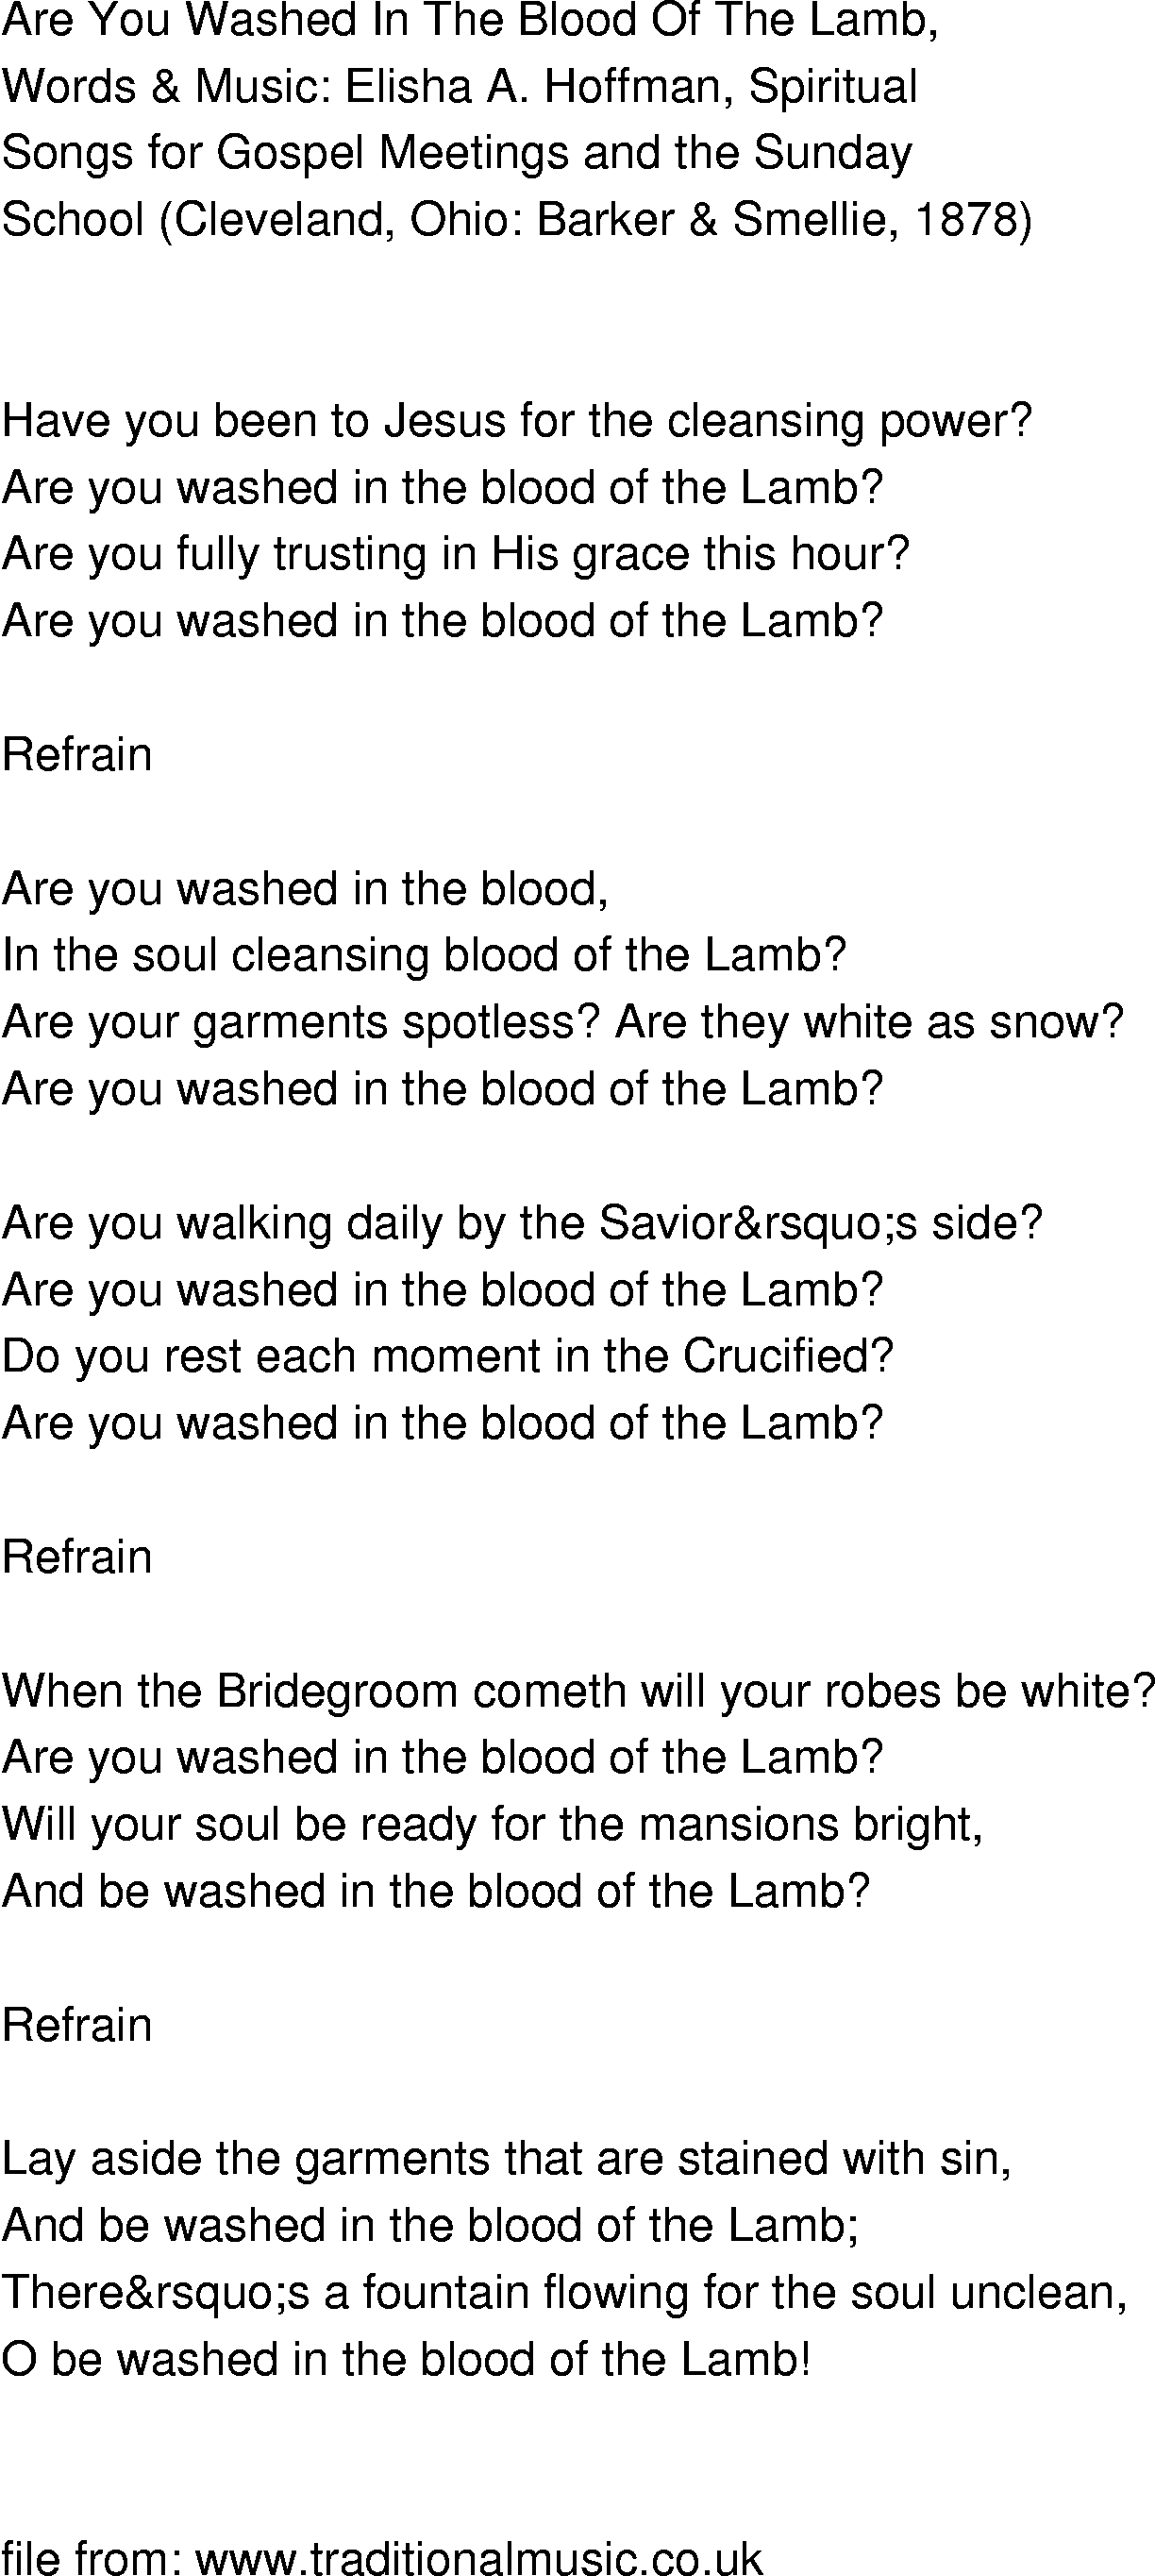 Old-Time (oldtimey) Song Lyrics - are you washed in the blood of the lamb